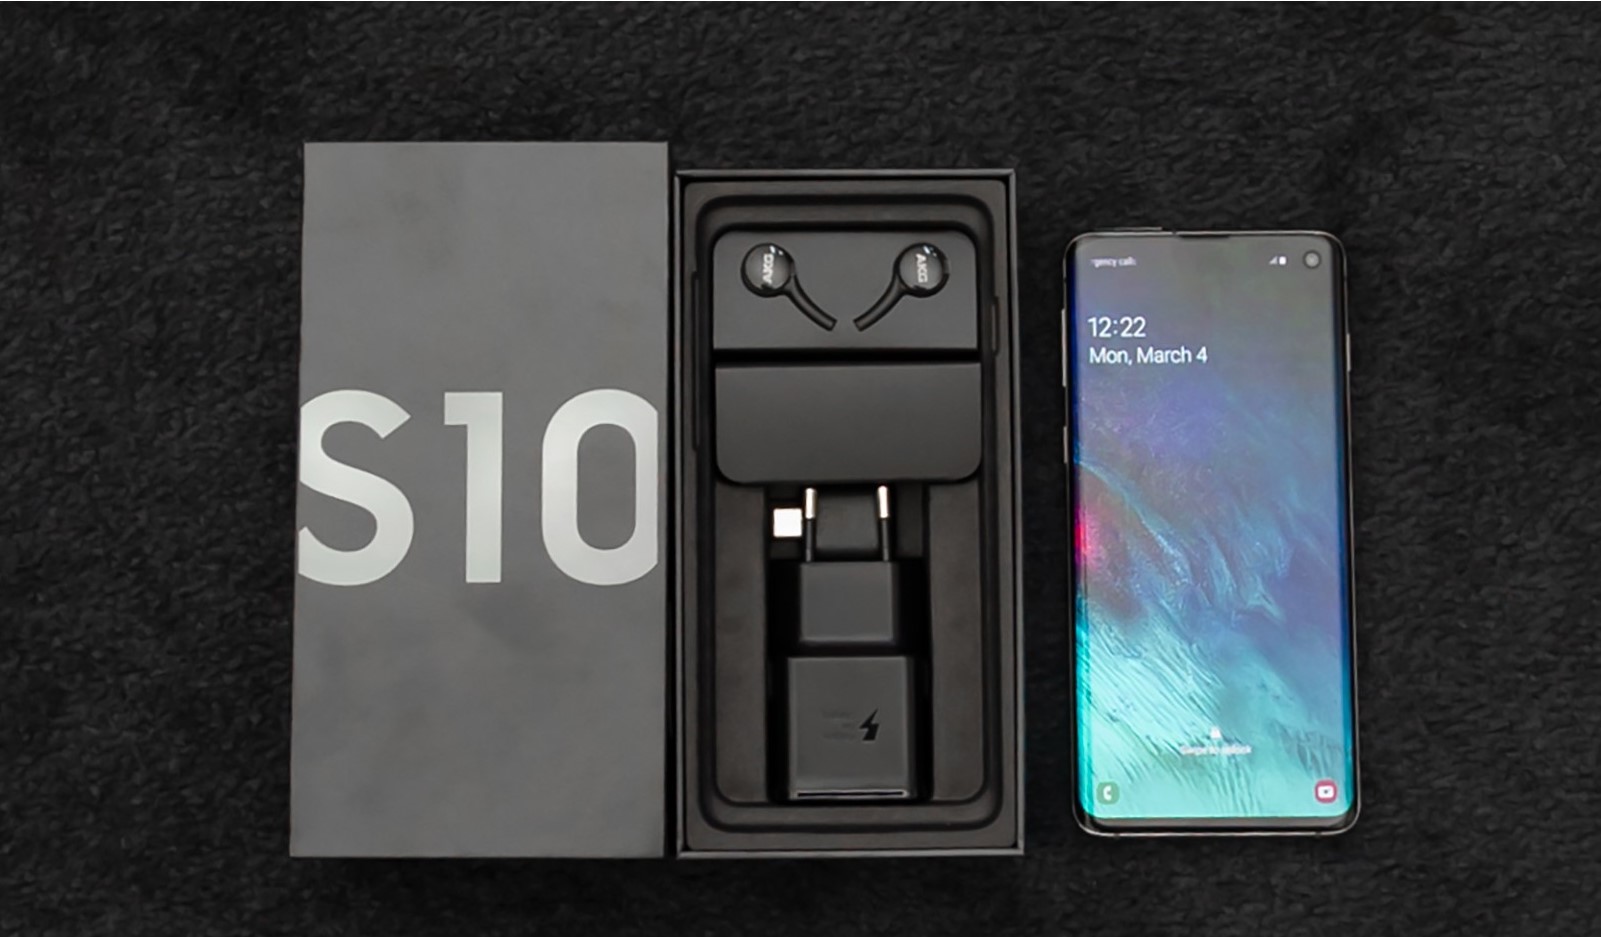 Unboxing of Samsung Galaxy s10 smartphone with Eco-Friendly Packaging